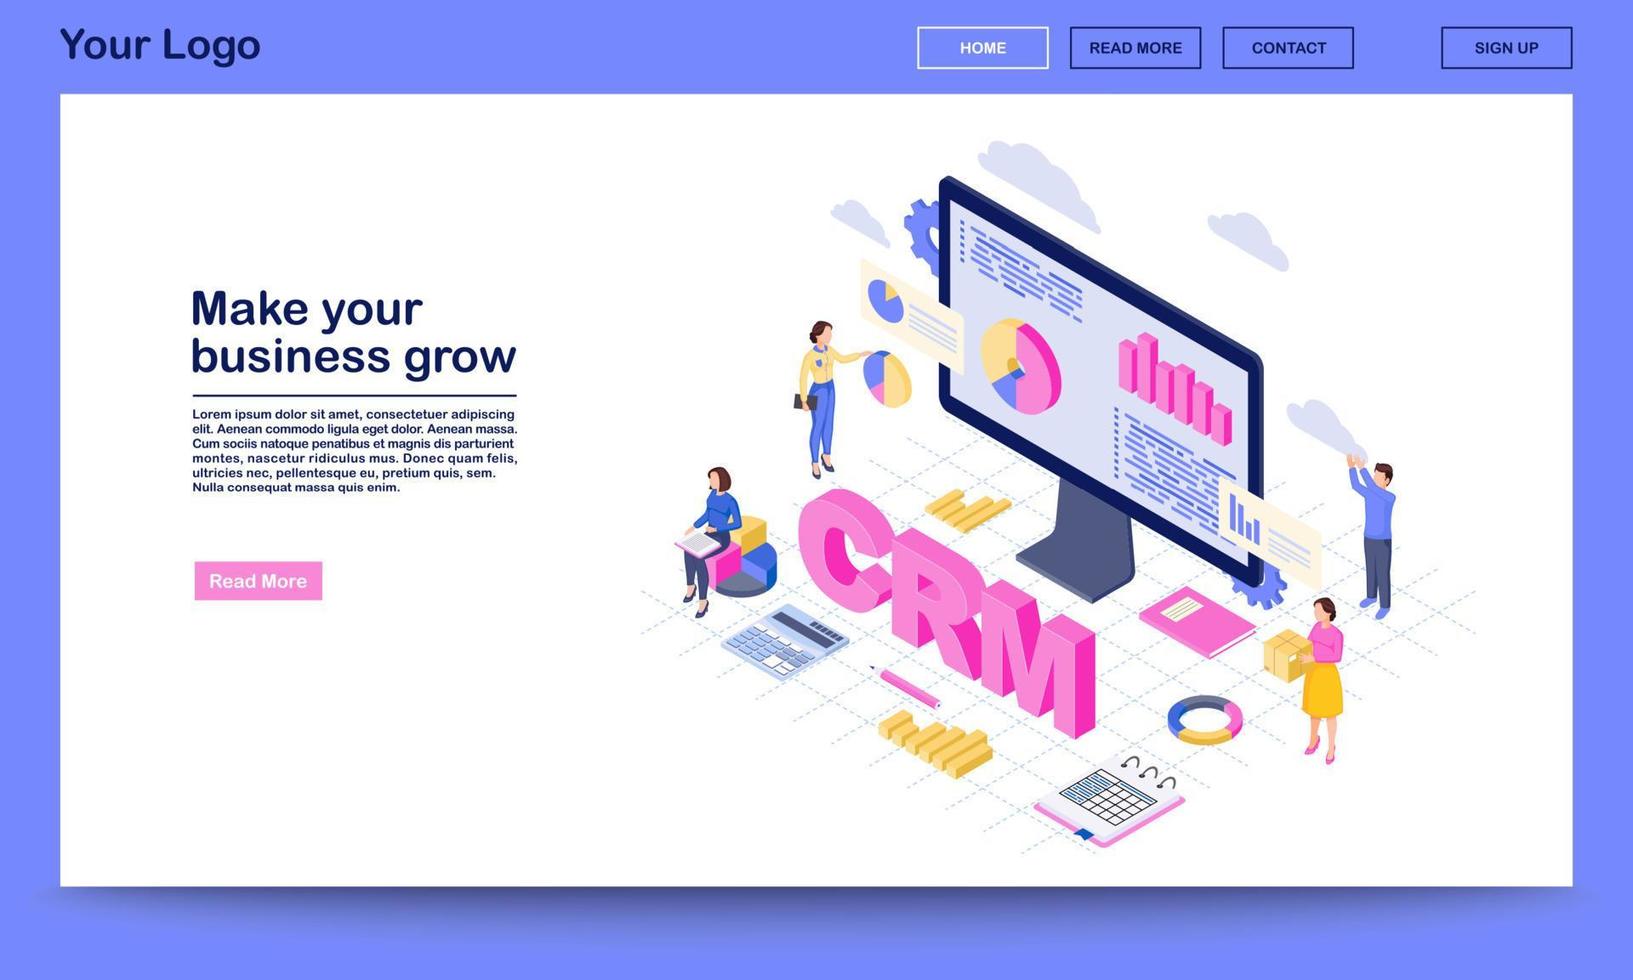 CRM for business growth isometric landing page vector template. Client data analysis, marketing statistics. Customer management automation website interface. CRM software 3d concept